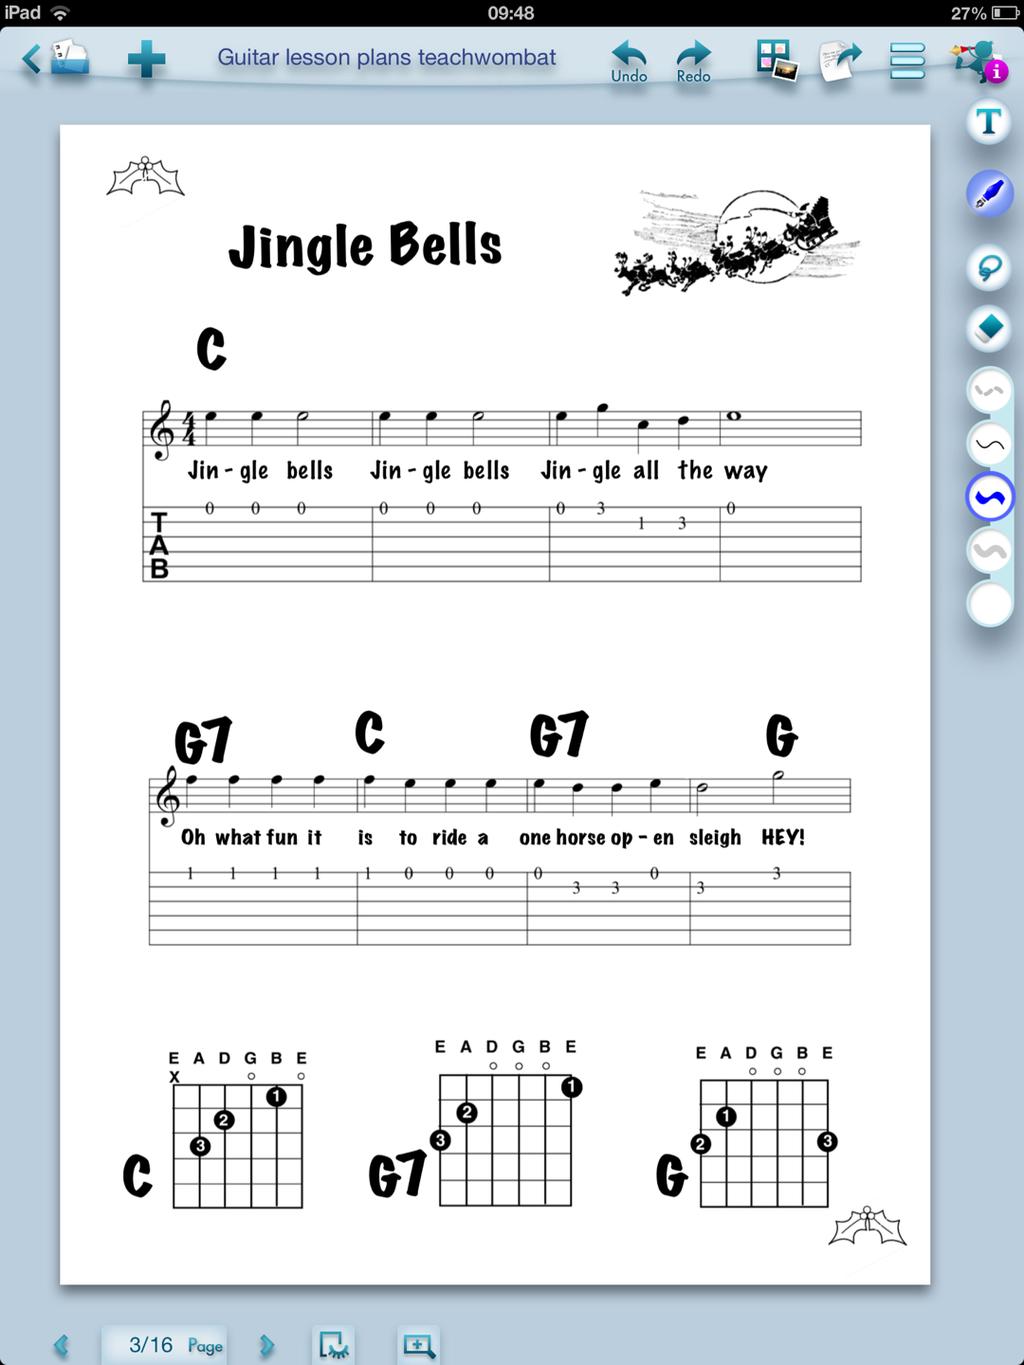 Jingle Bells C Jin - gle bells Jin - gle bells Jin - gle all the way G7